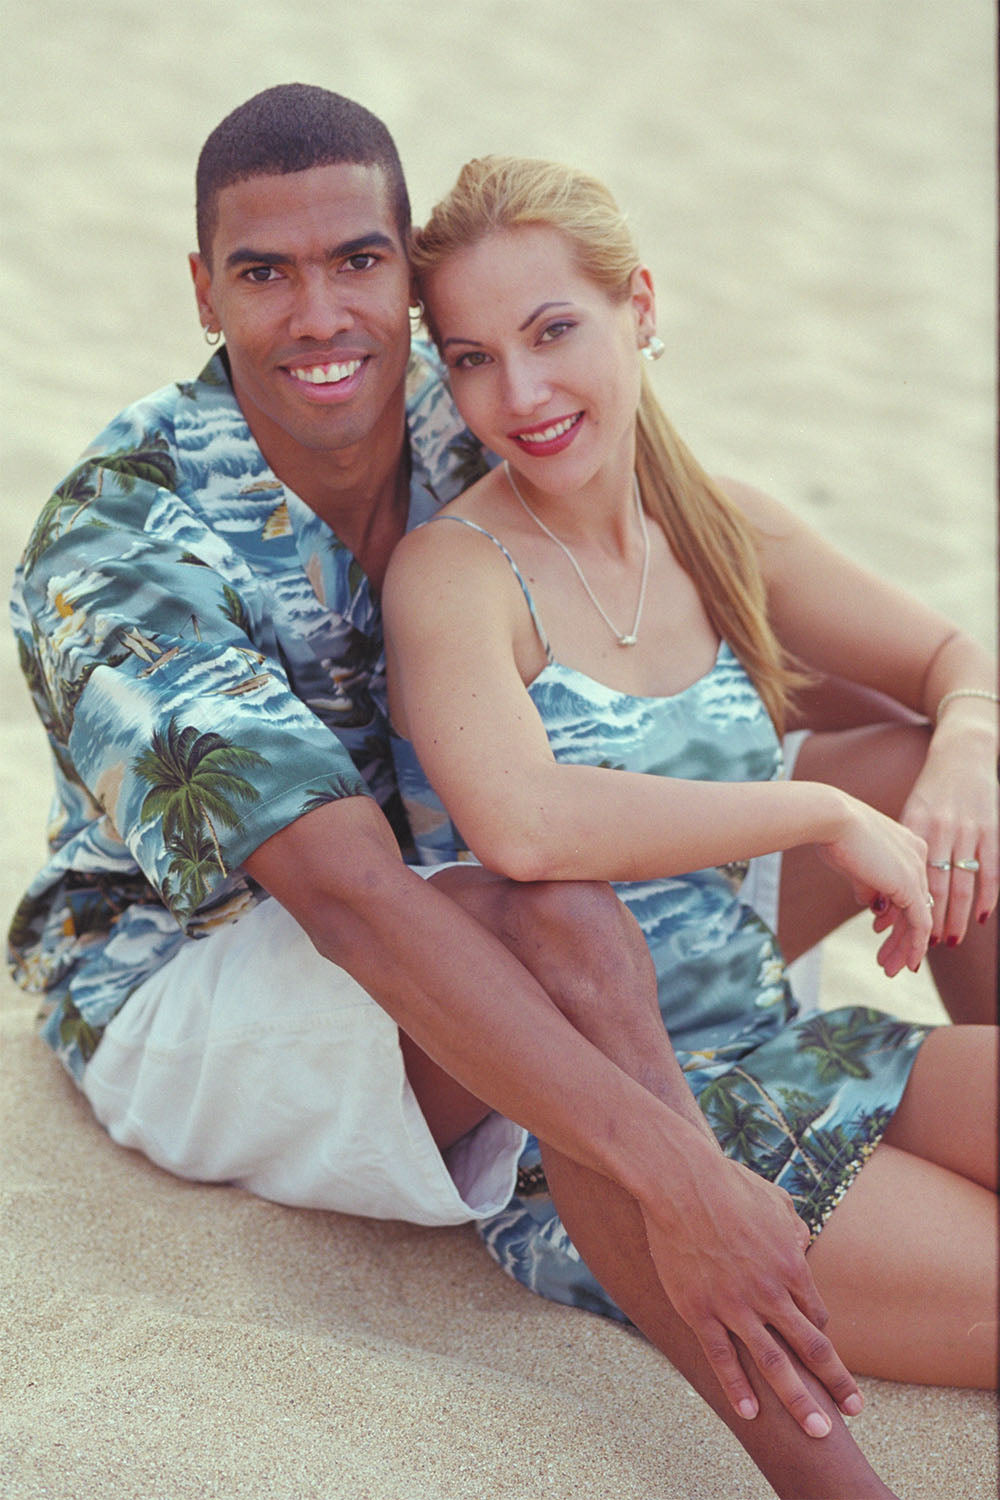 Casey and Angel in matching Hawaiian shirt and dress